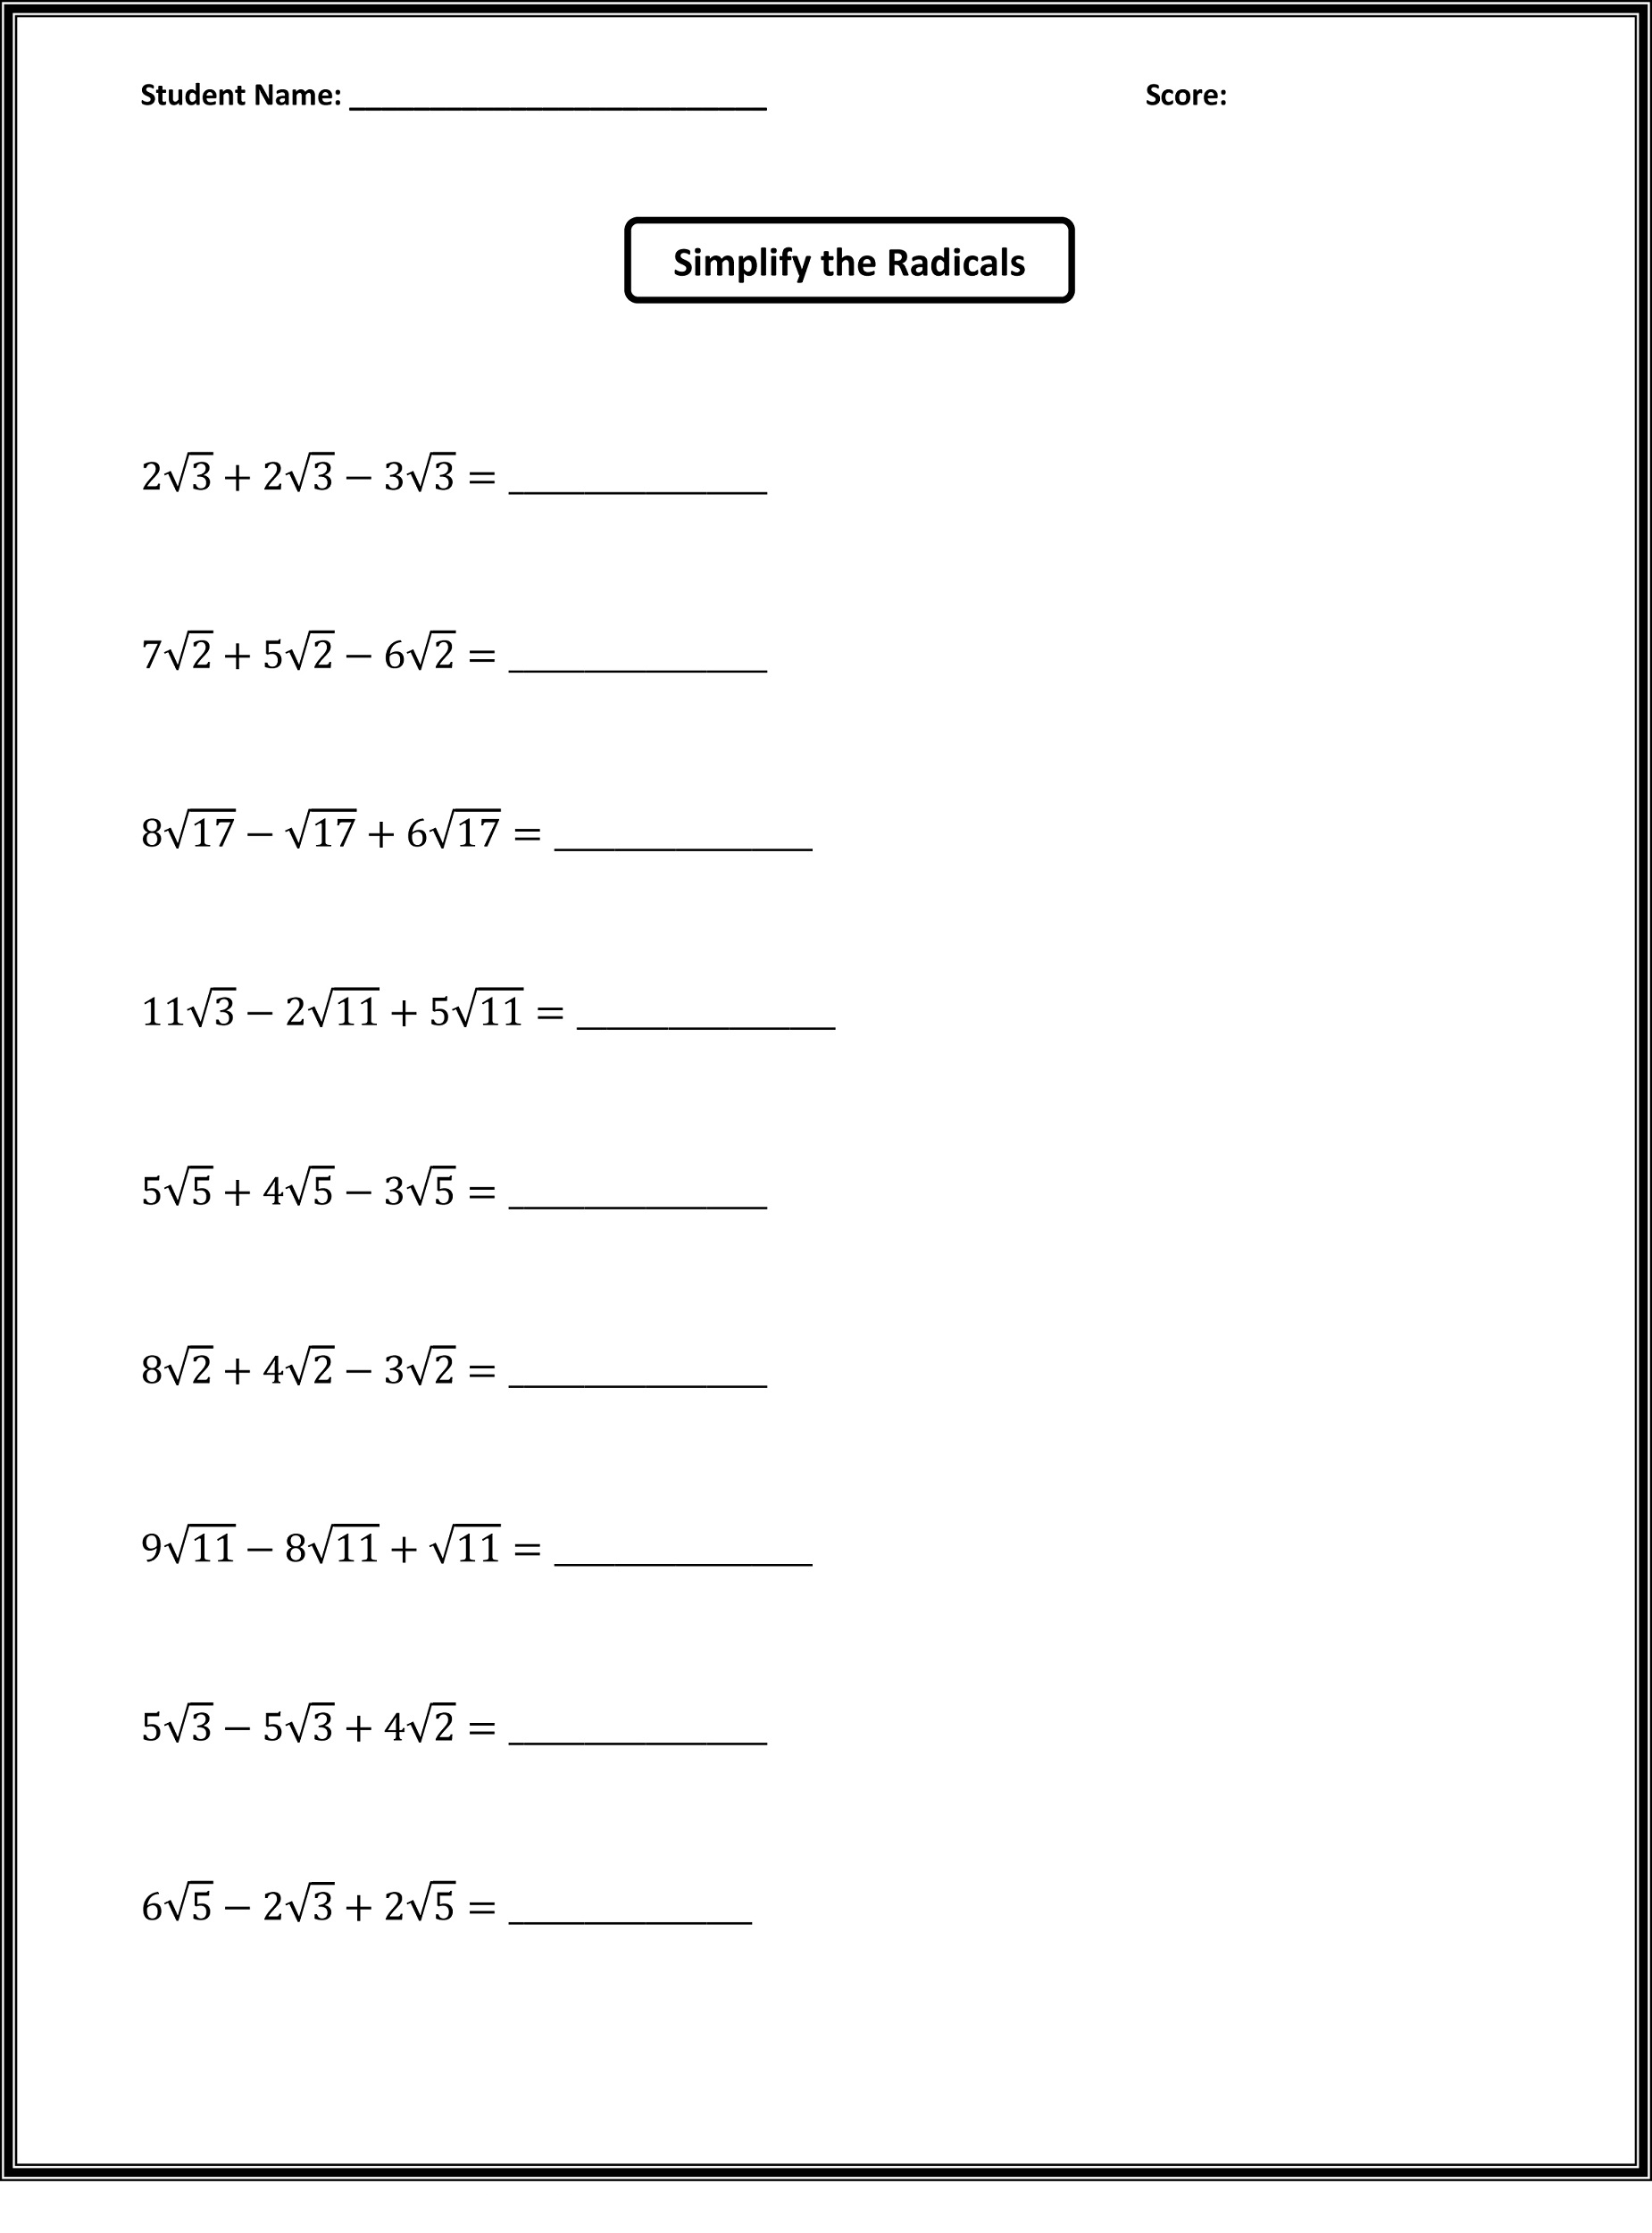 16-free-printable-6th-grade-worksheets-photos-rugby-rumilly